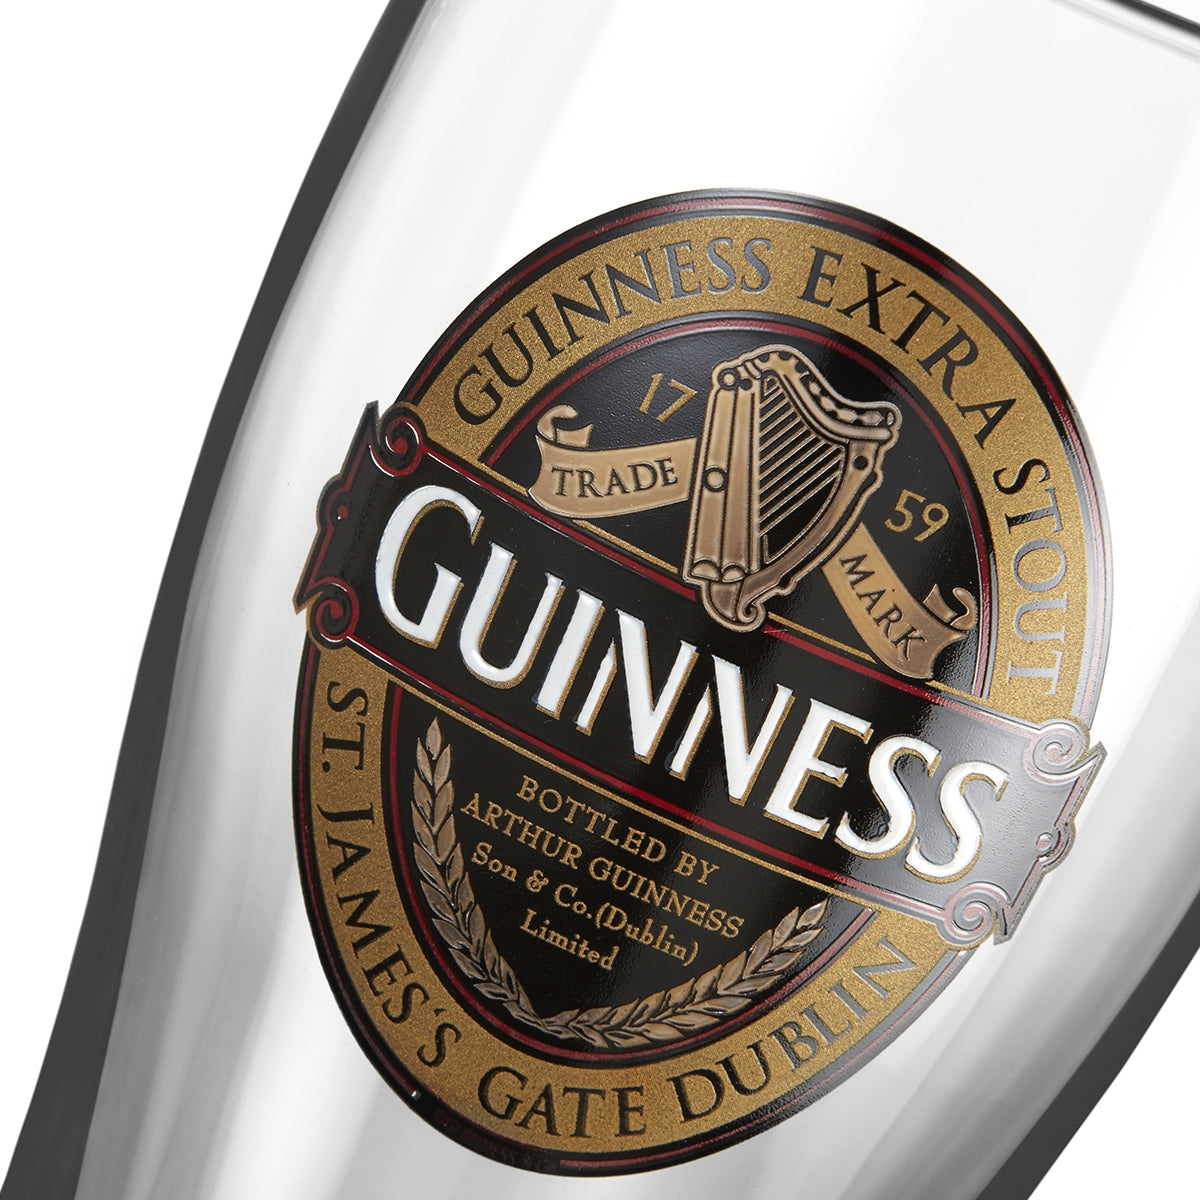 Guinness UK Pint glass with a Guinness Classic Collection logo on it.